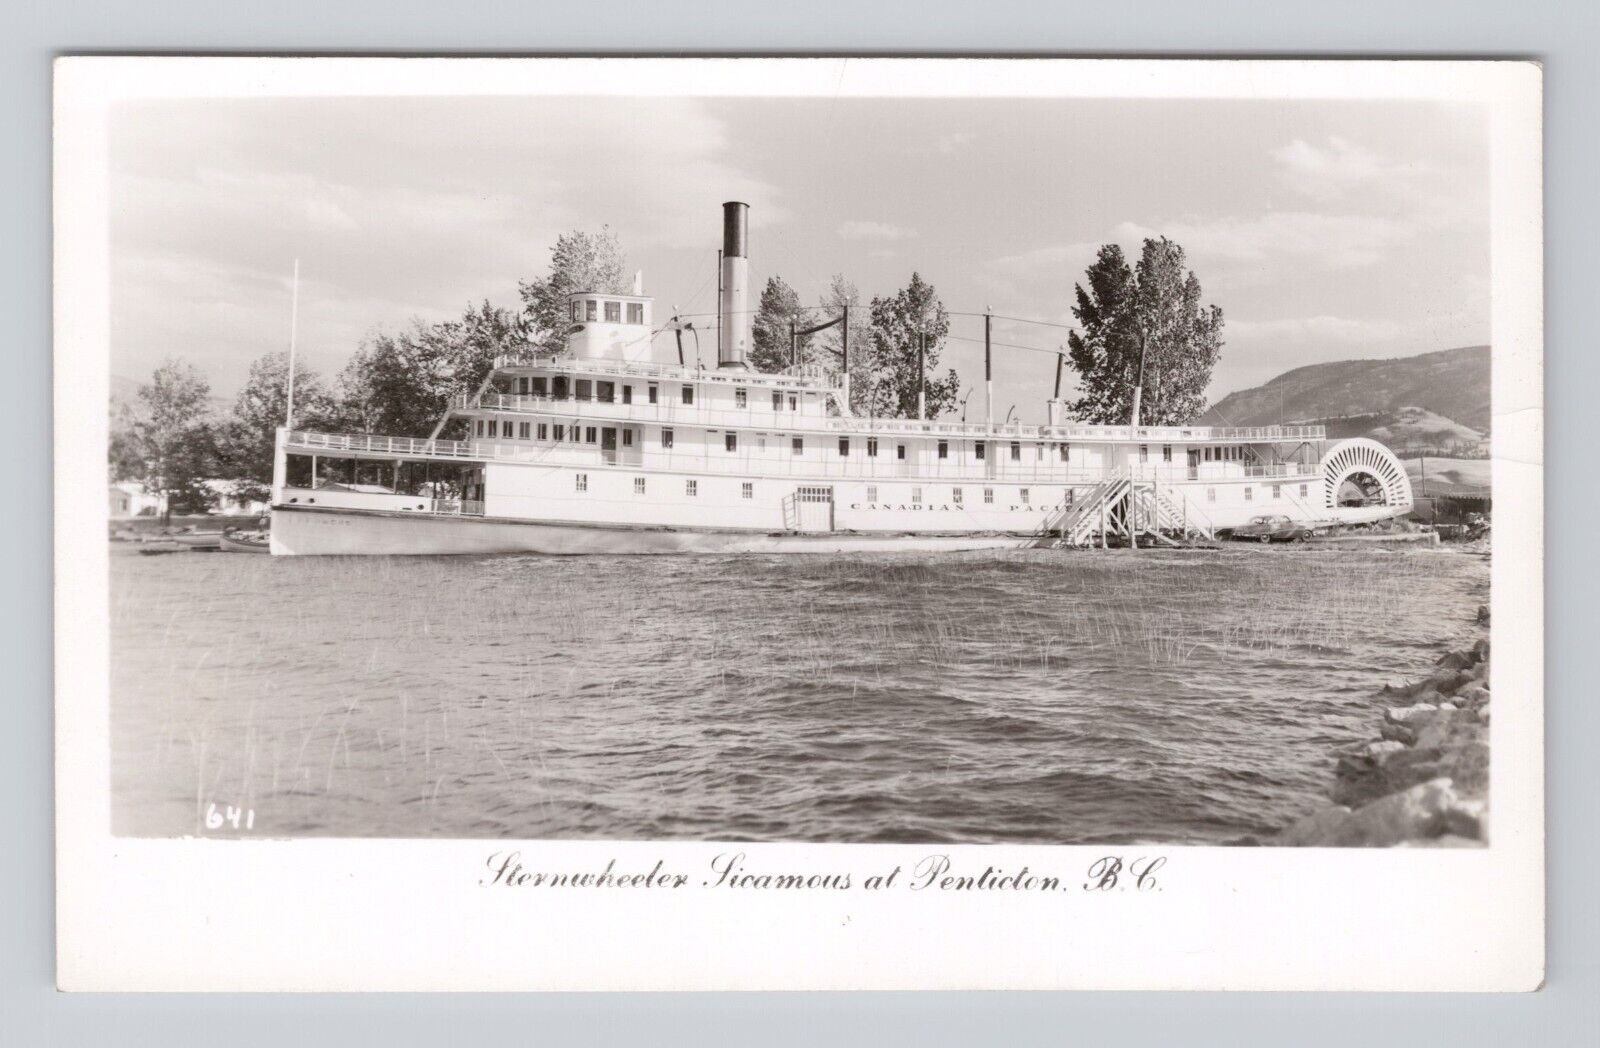 Postcard RPPC Sternwheeler SS Sicamous at Pencticton B.C. Canadian Pacific